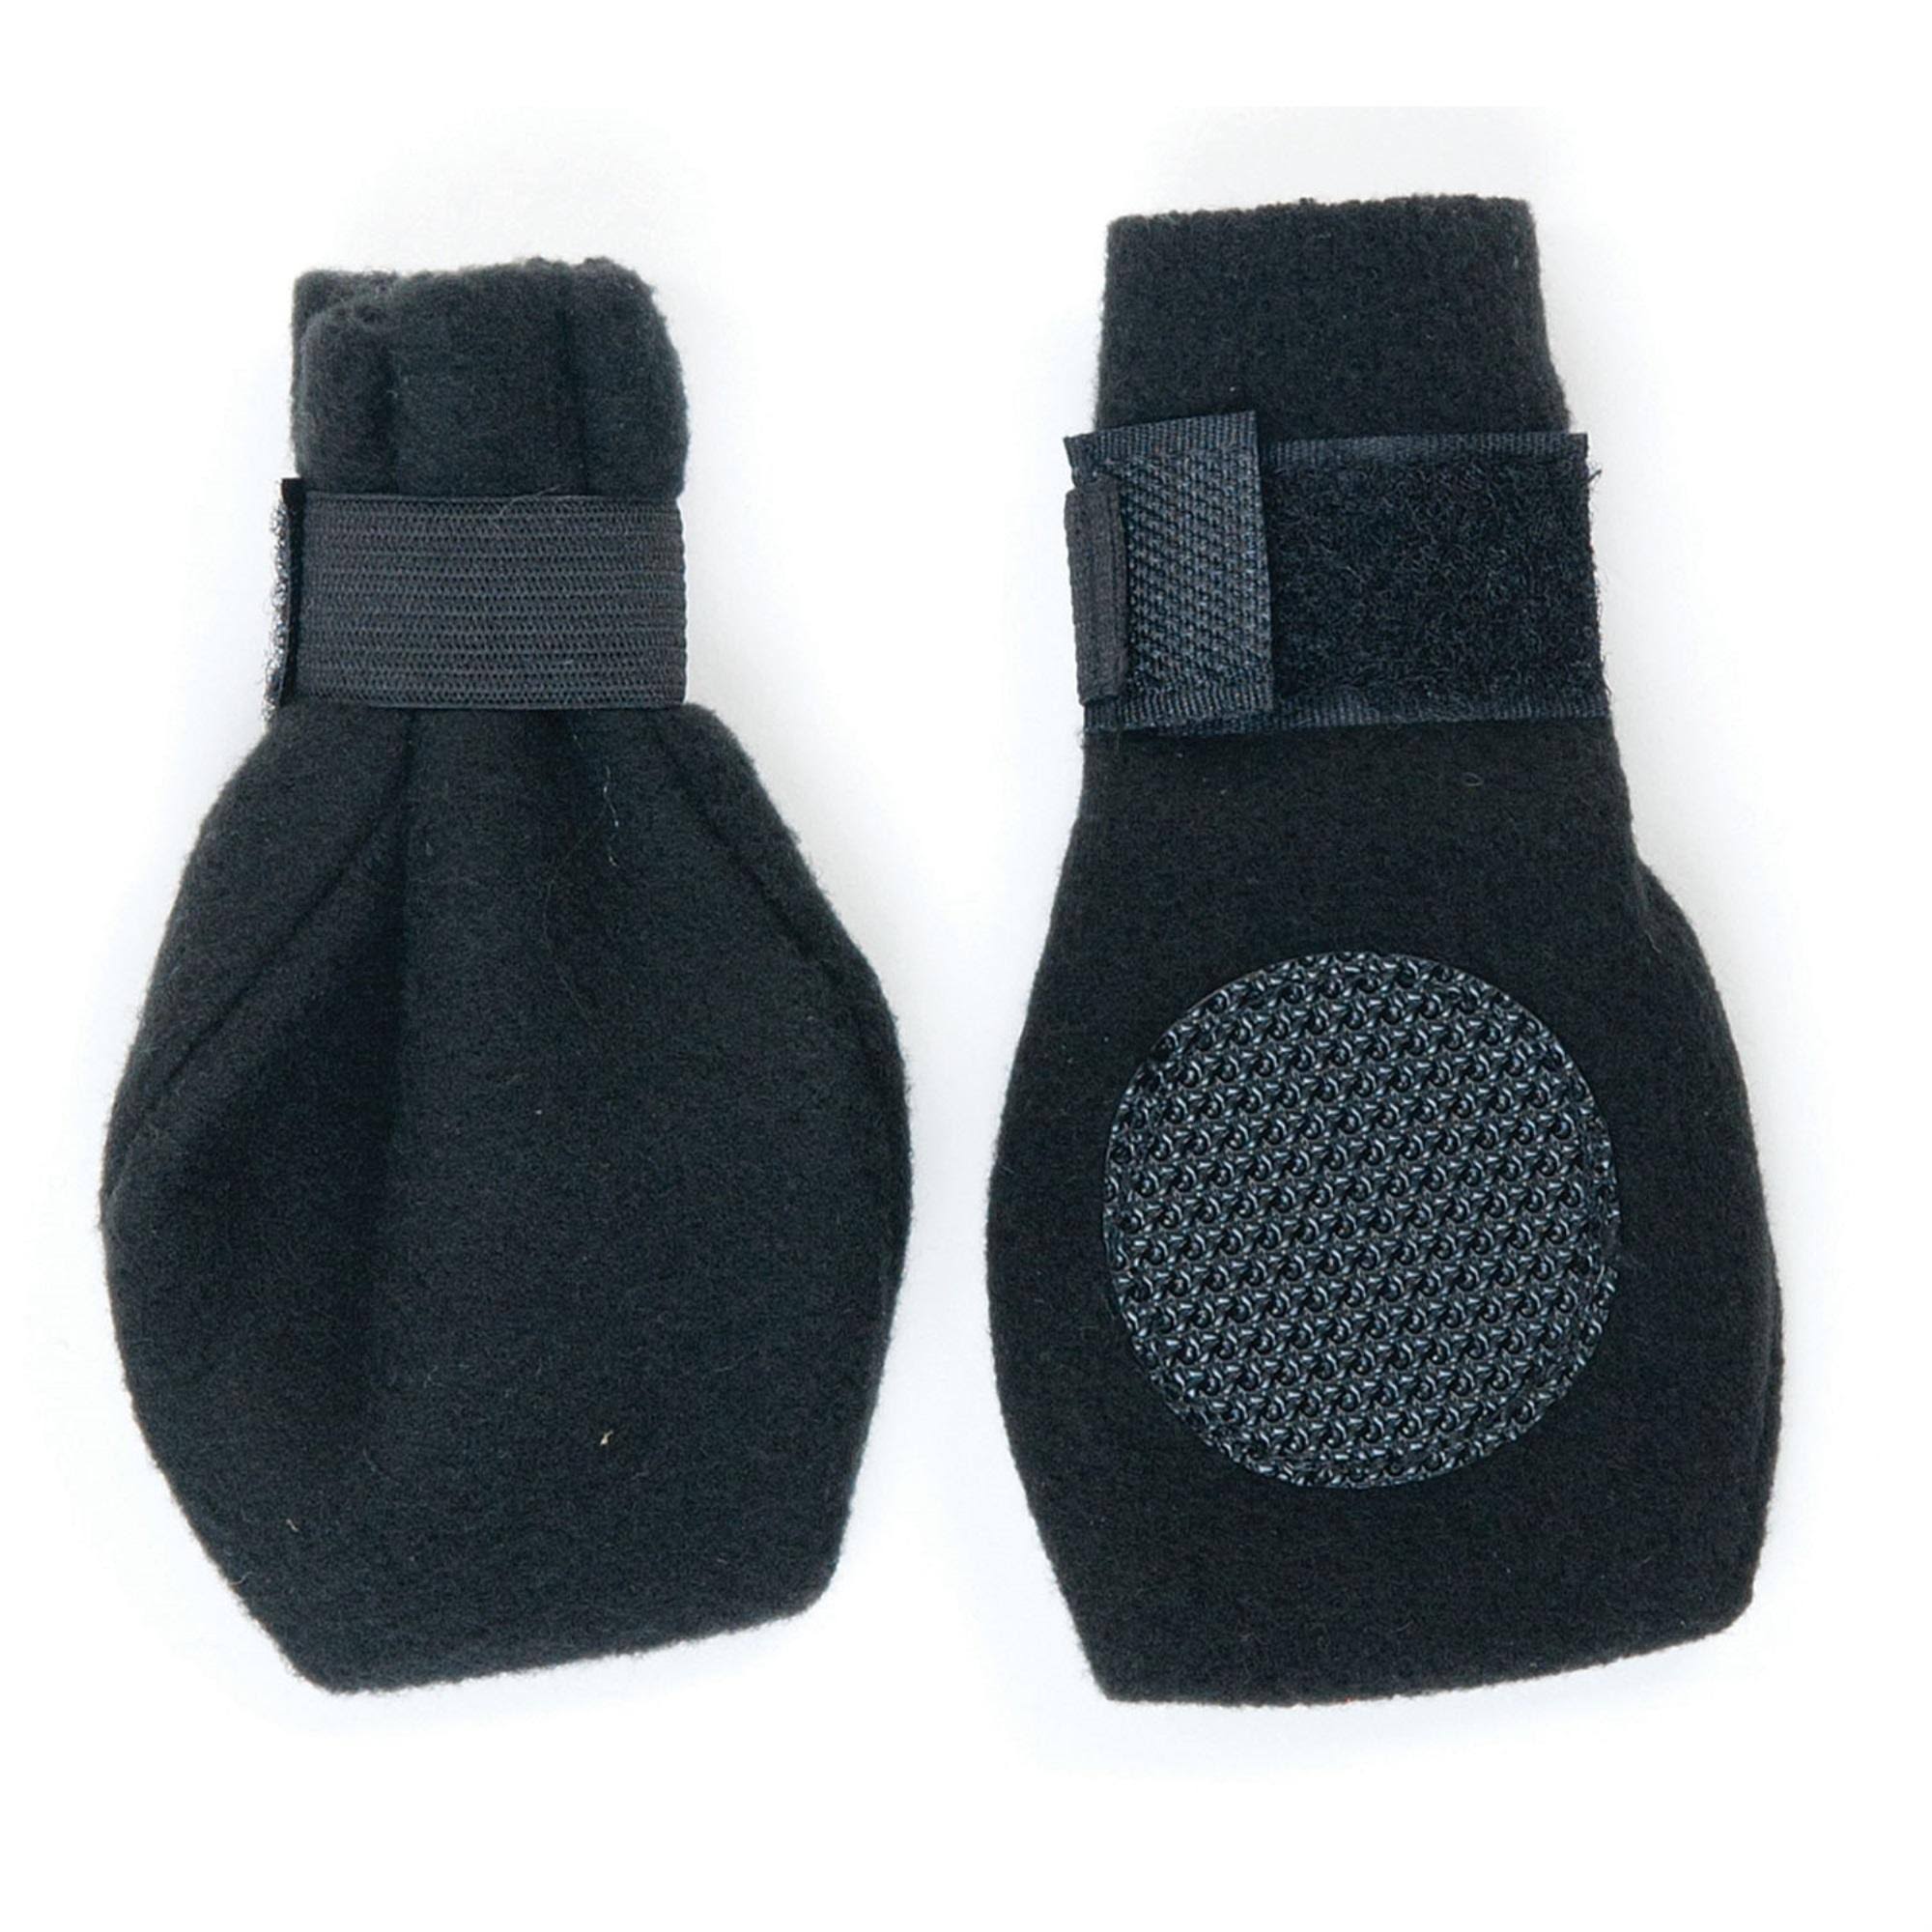 Ethical Pet Arctic Boots for Dogs - Black, Small